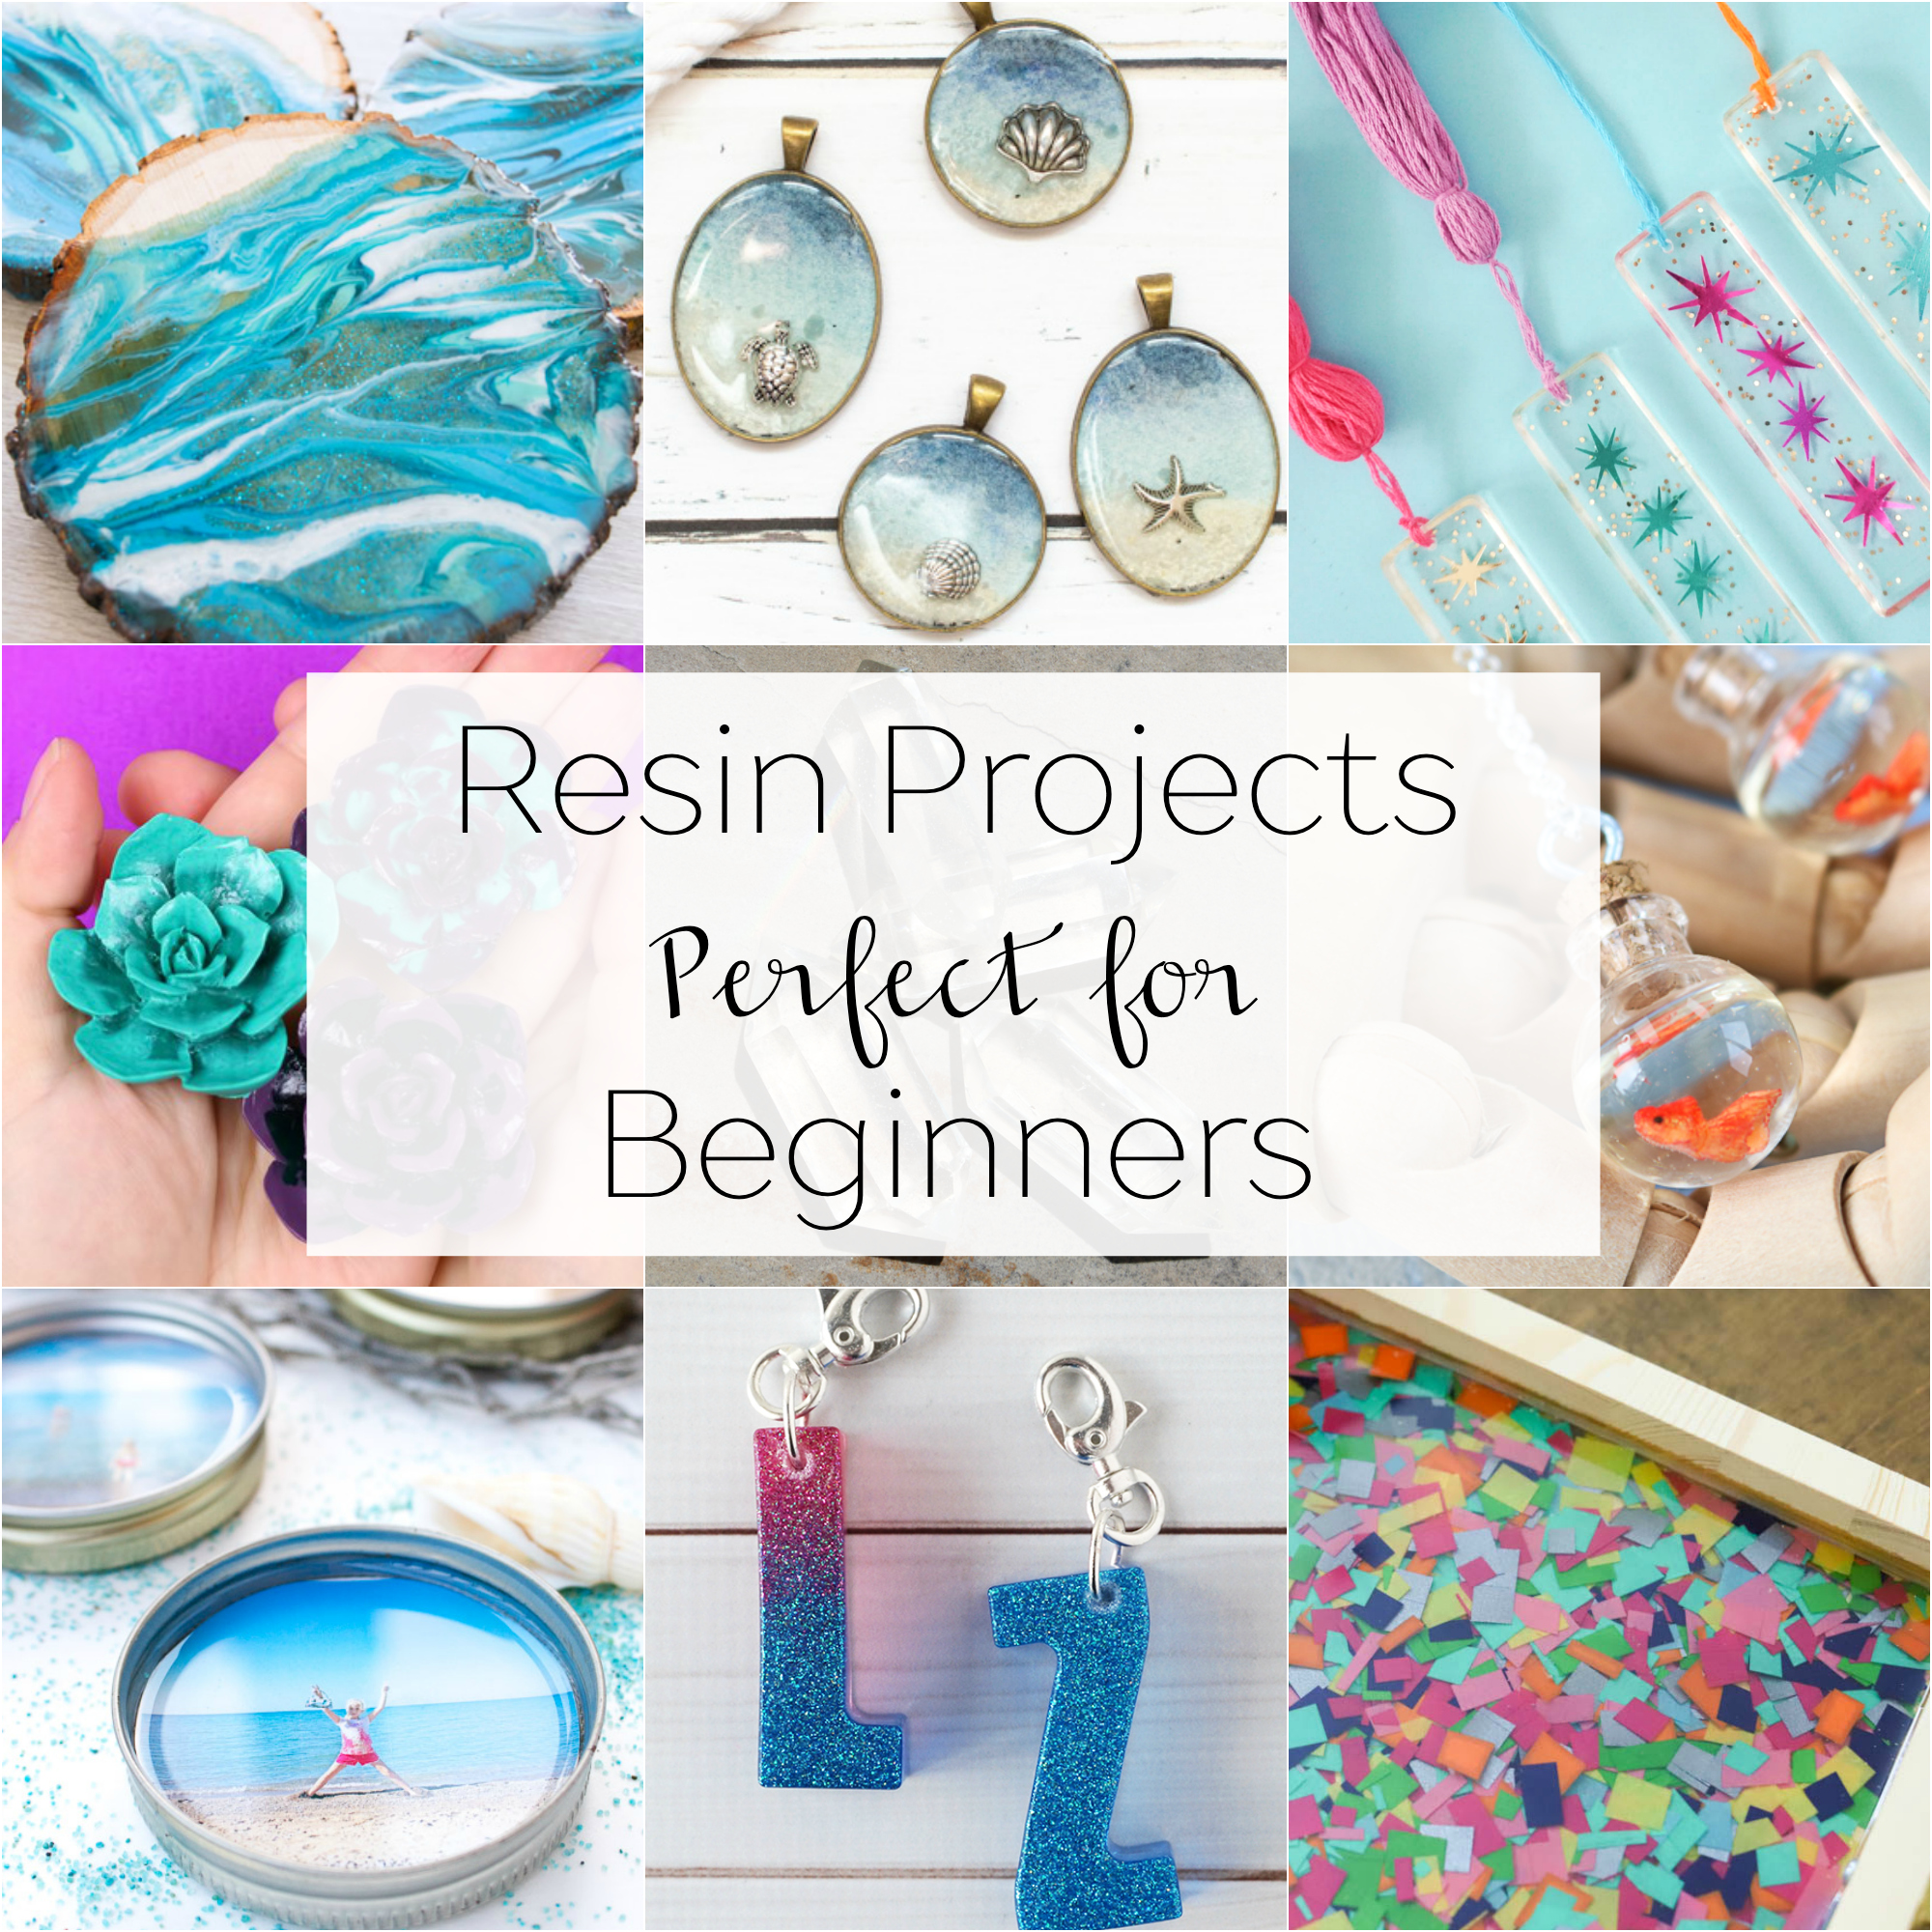 Fabulous Beginner Resin Projects to Try - Resin Crafts Blog